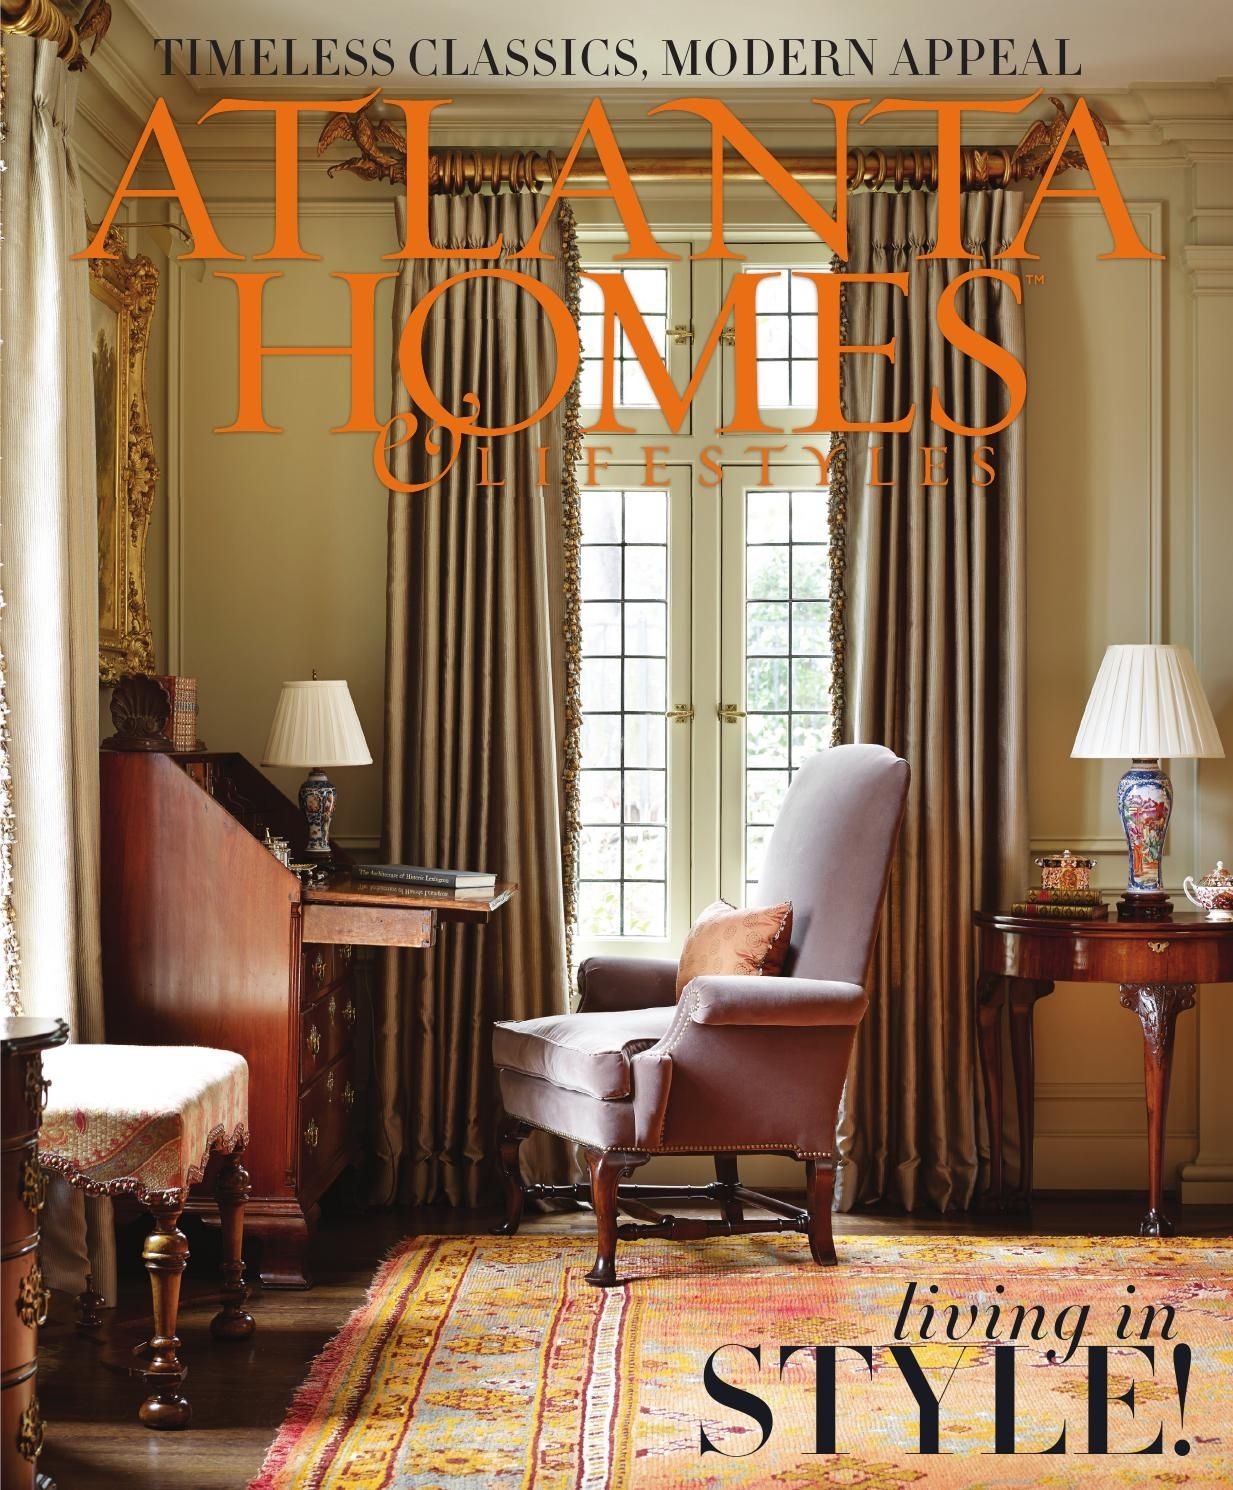 Atlanta Homes & Lifestyles March 2015 Issueatlanta Homes Pertaining To 2017 Combs 5 Piece 48 Inch Extension Dining Sets With Pearson White Chairs (View 15 of 20)